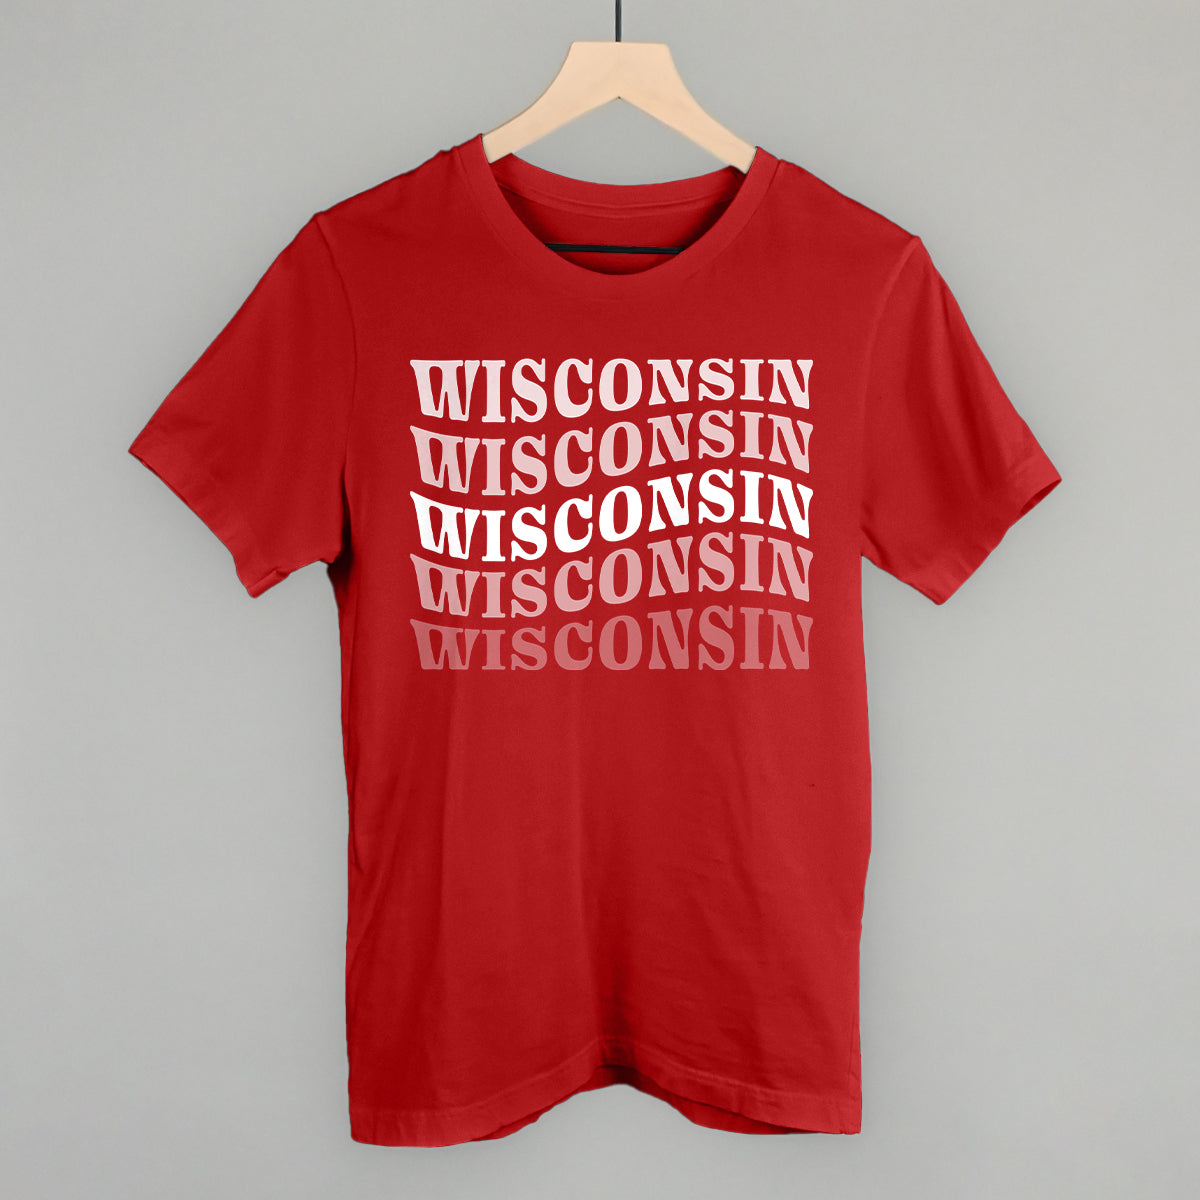 Wisconsin (Repeated Wave)